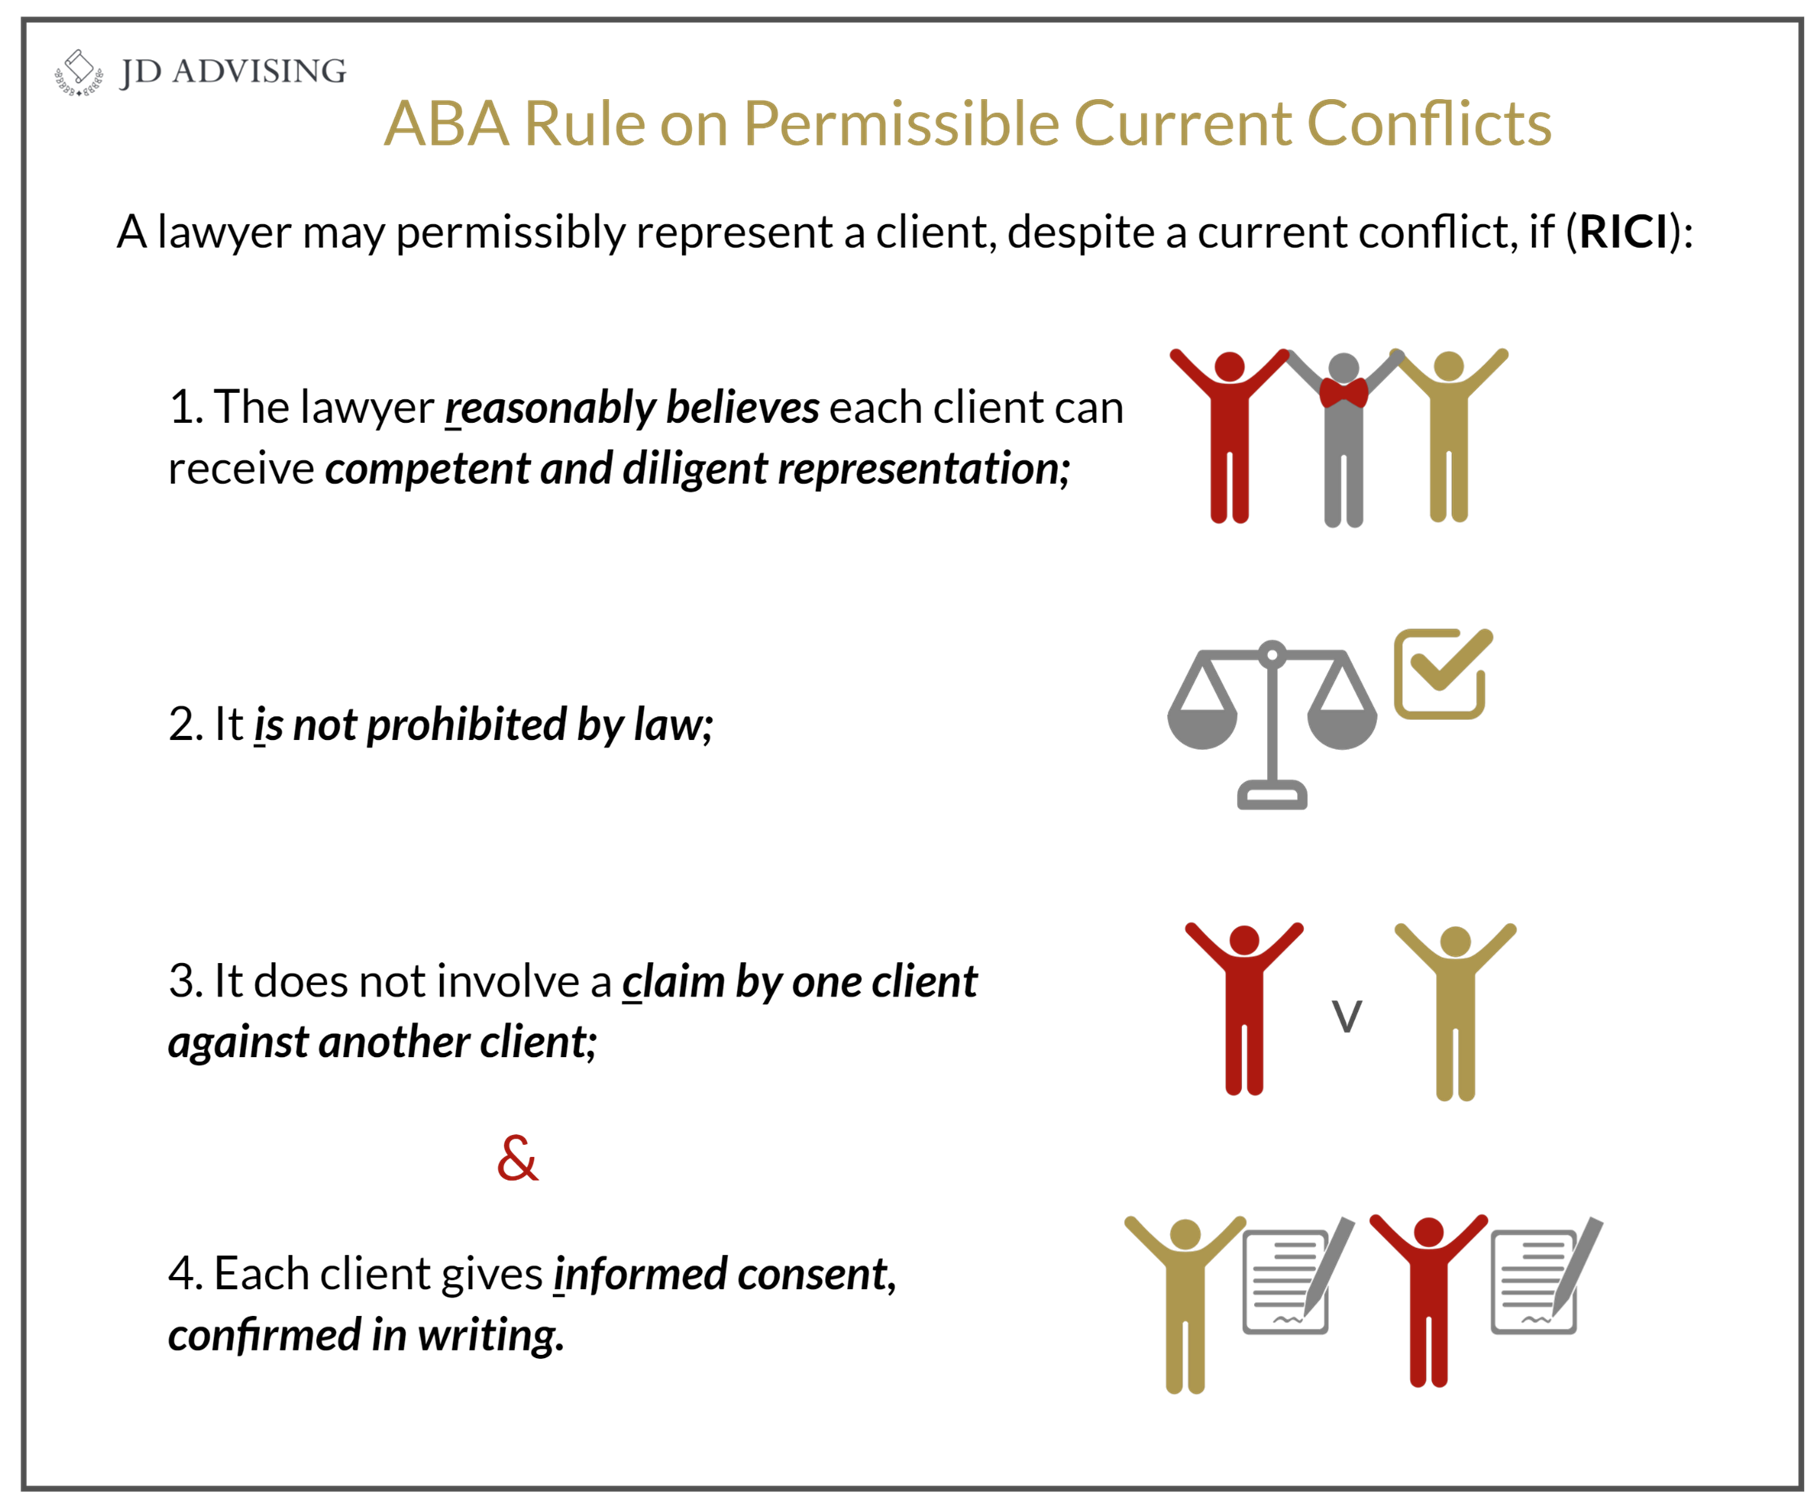 ABA Rule on Permissible Current Conflicts